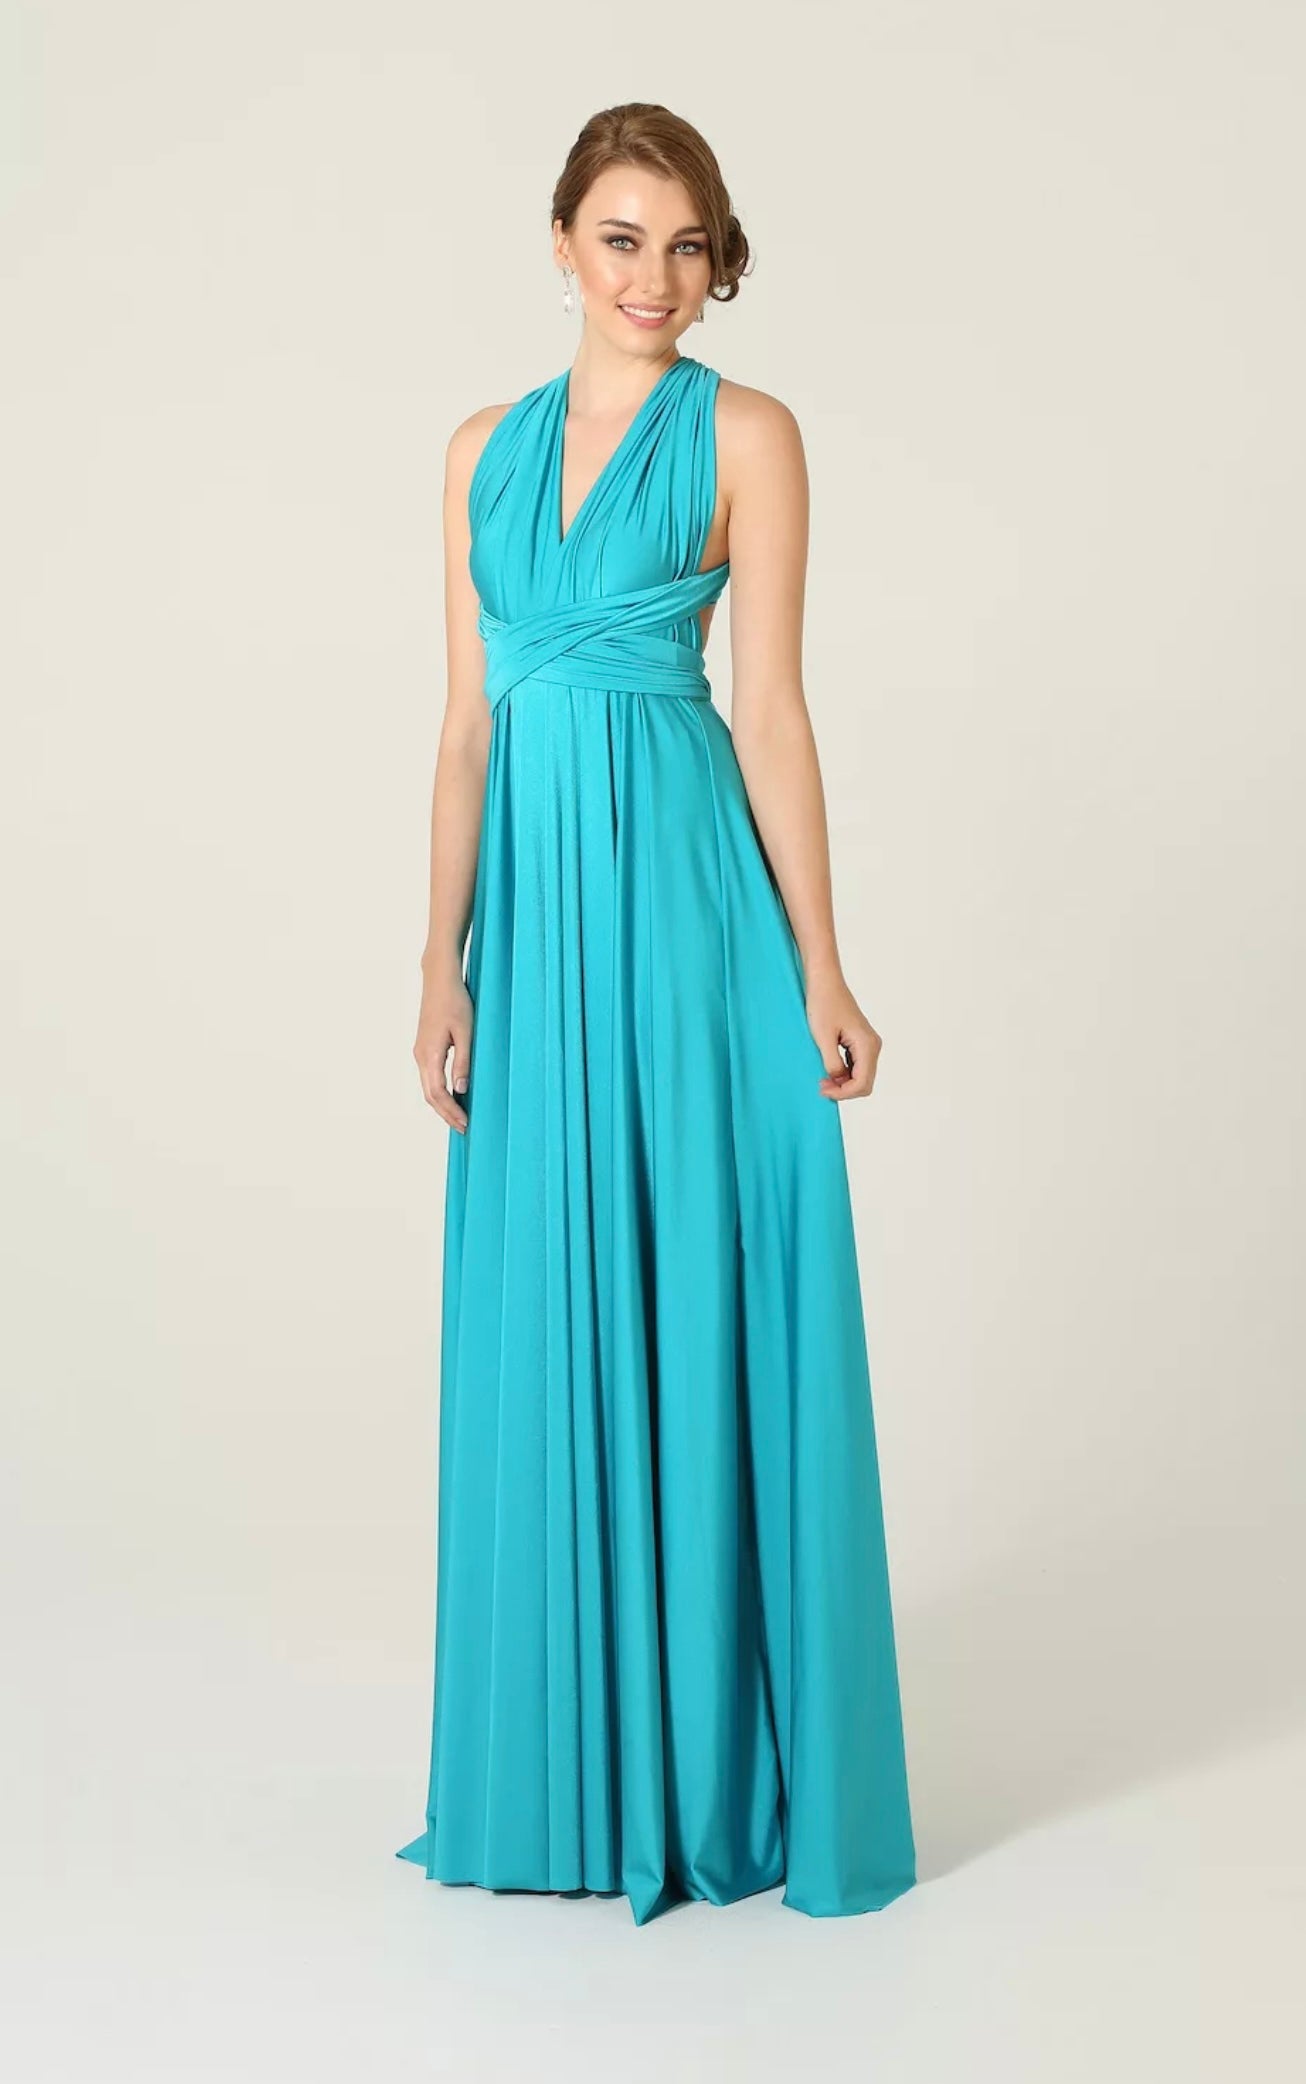 Try Before You Buy Infinity Wrap Bridesmaid Dress by Tania Olsen